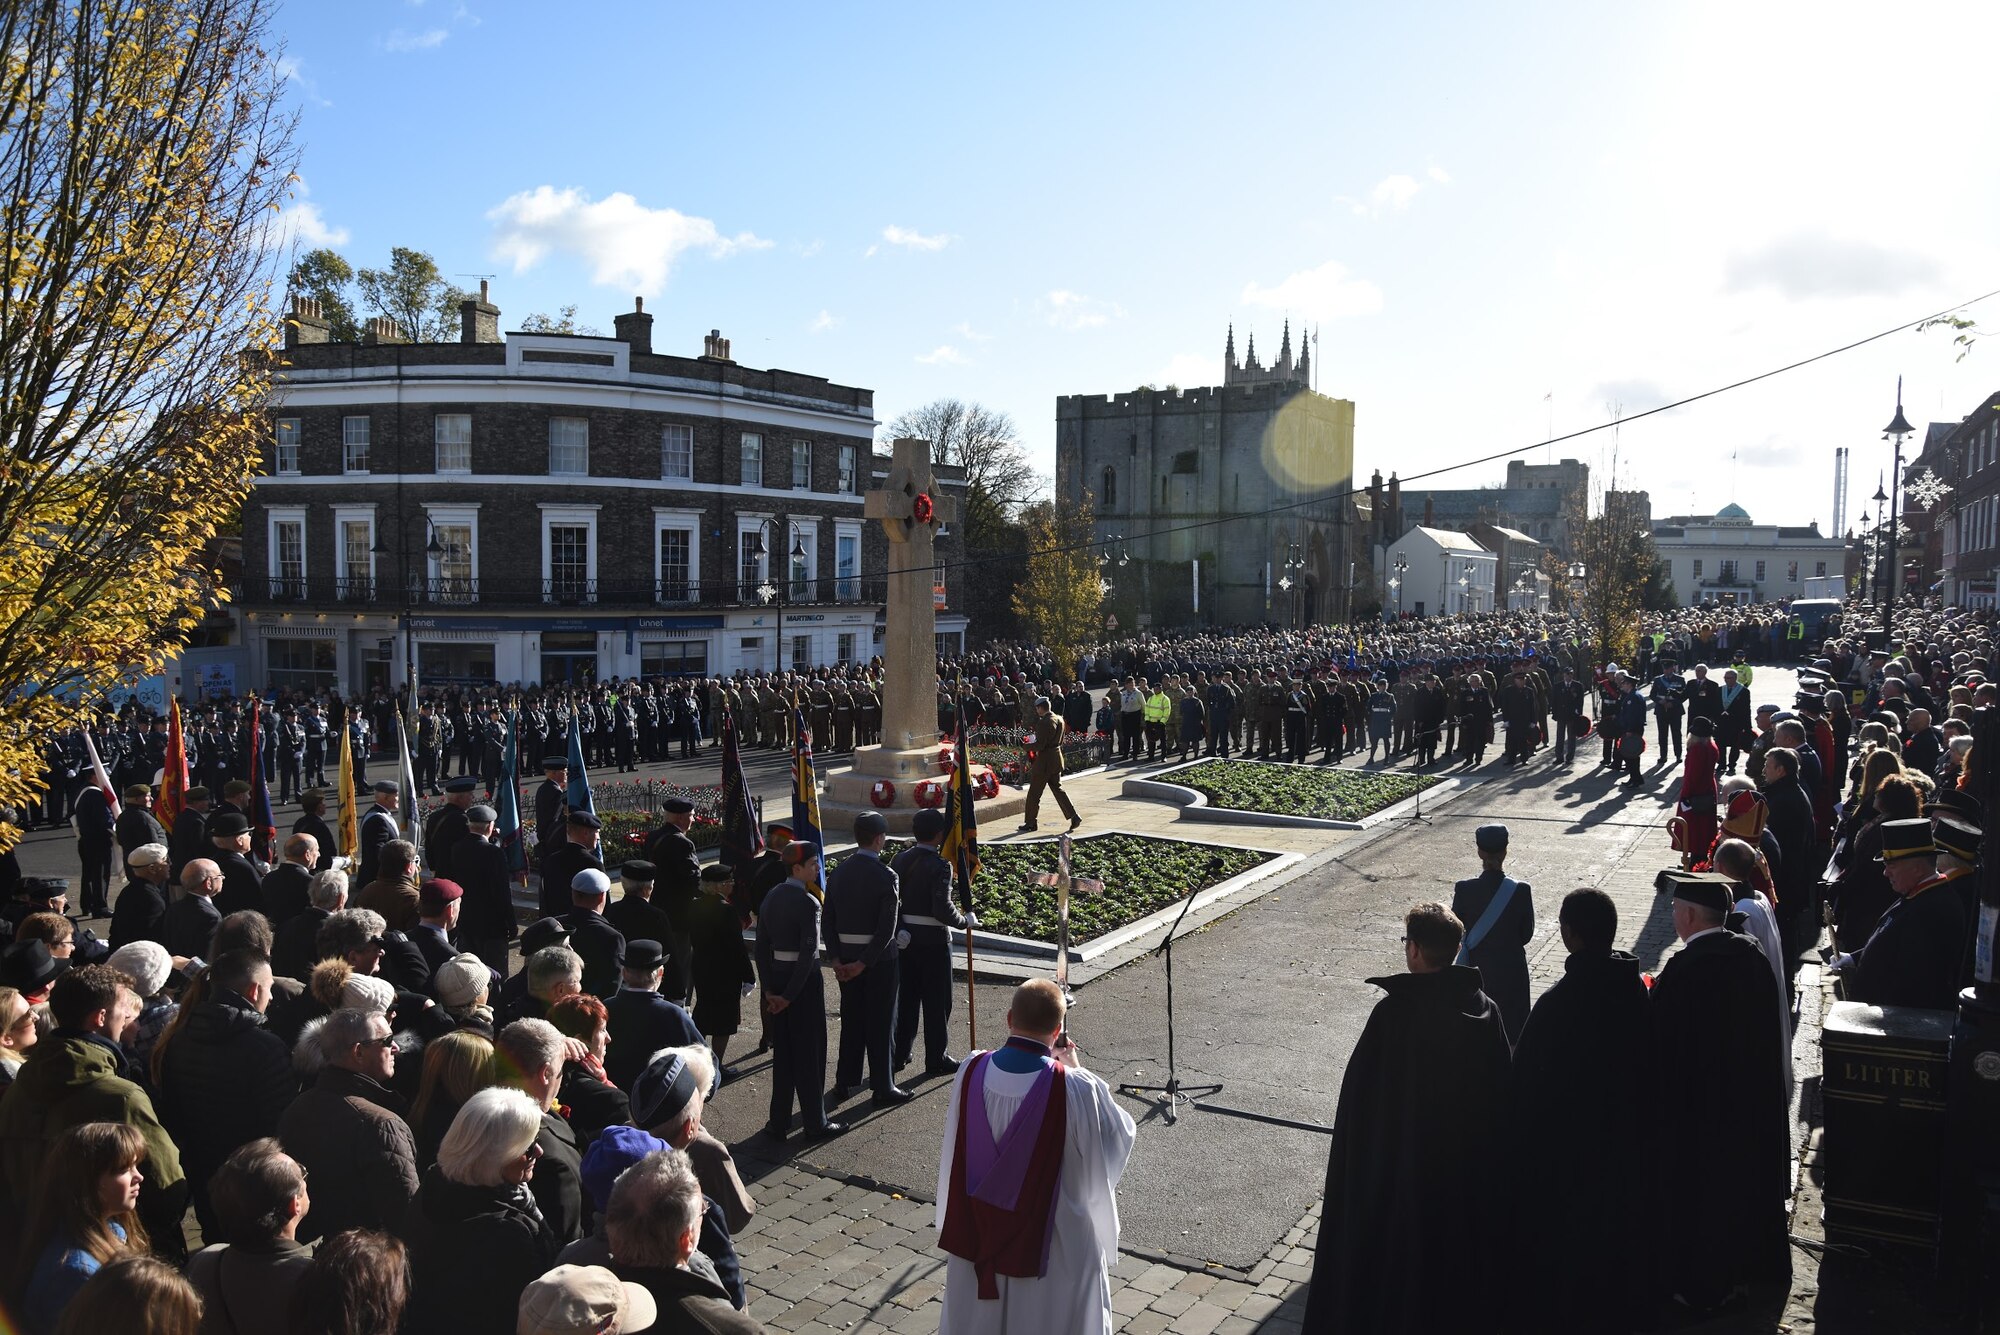 U.S. Airmen stationed at RAF Lakenheath and RAF Mildenhall march in a Remembrance Day parade in Bury St. Edmunds, Suffolk, England, Nov. 12, 2017. Members of the U.S. Air Force and Royal Air Force, civic leaders, military cadets and others also participated. They gathered around the town square with a crowd of supporters to offer prayers and thanks to those soldiers who sacrificed their lives during the wars. (U.S. Air Force photo by Senior Airman Kelly O'Connor)